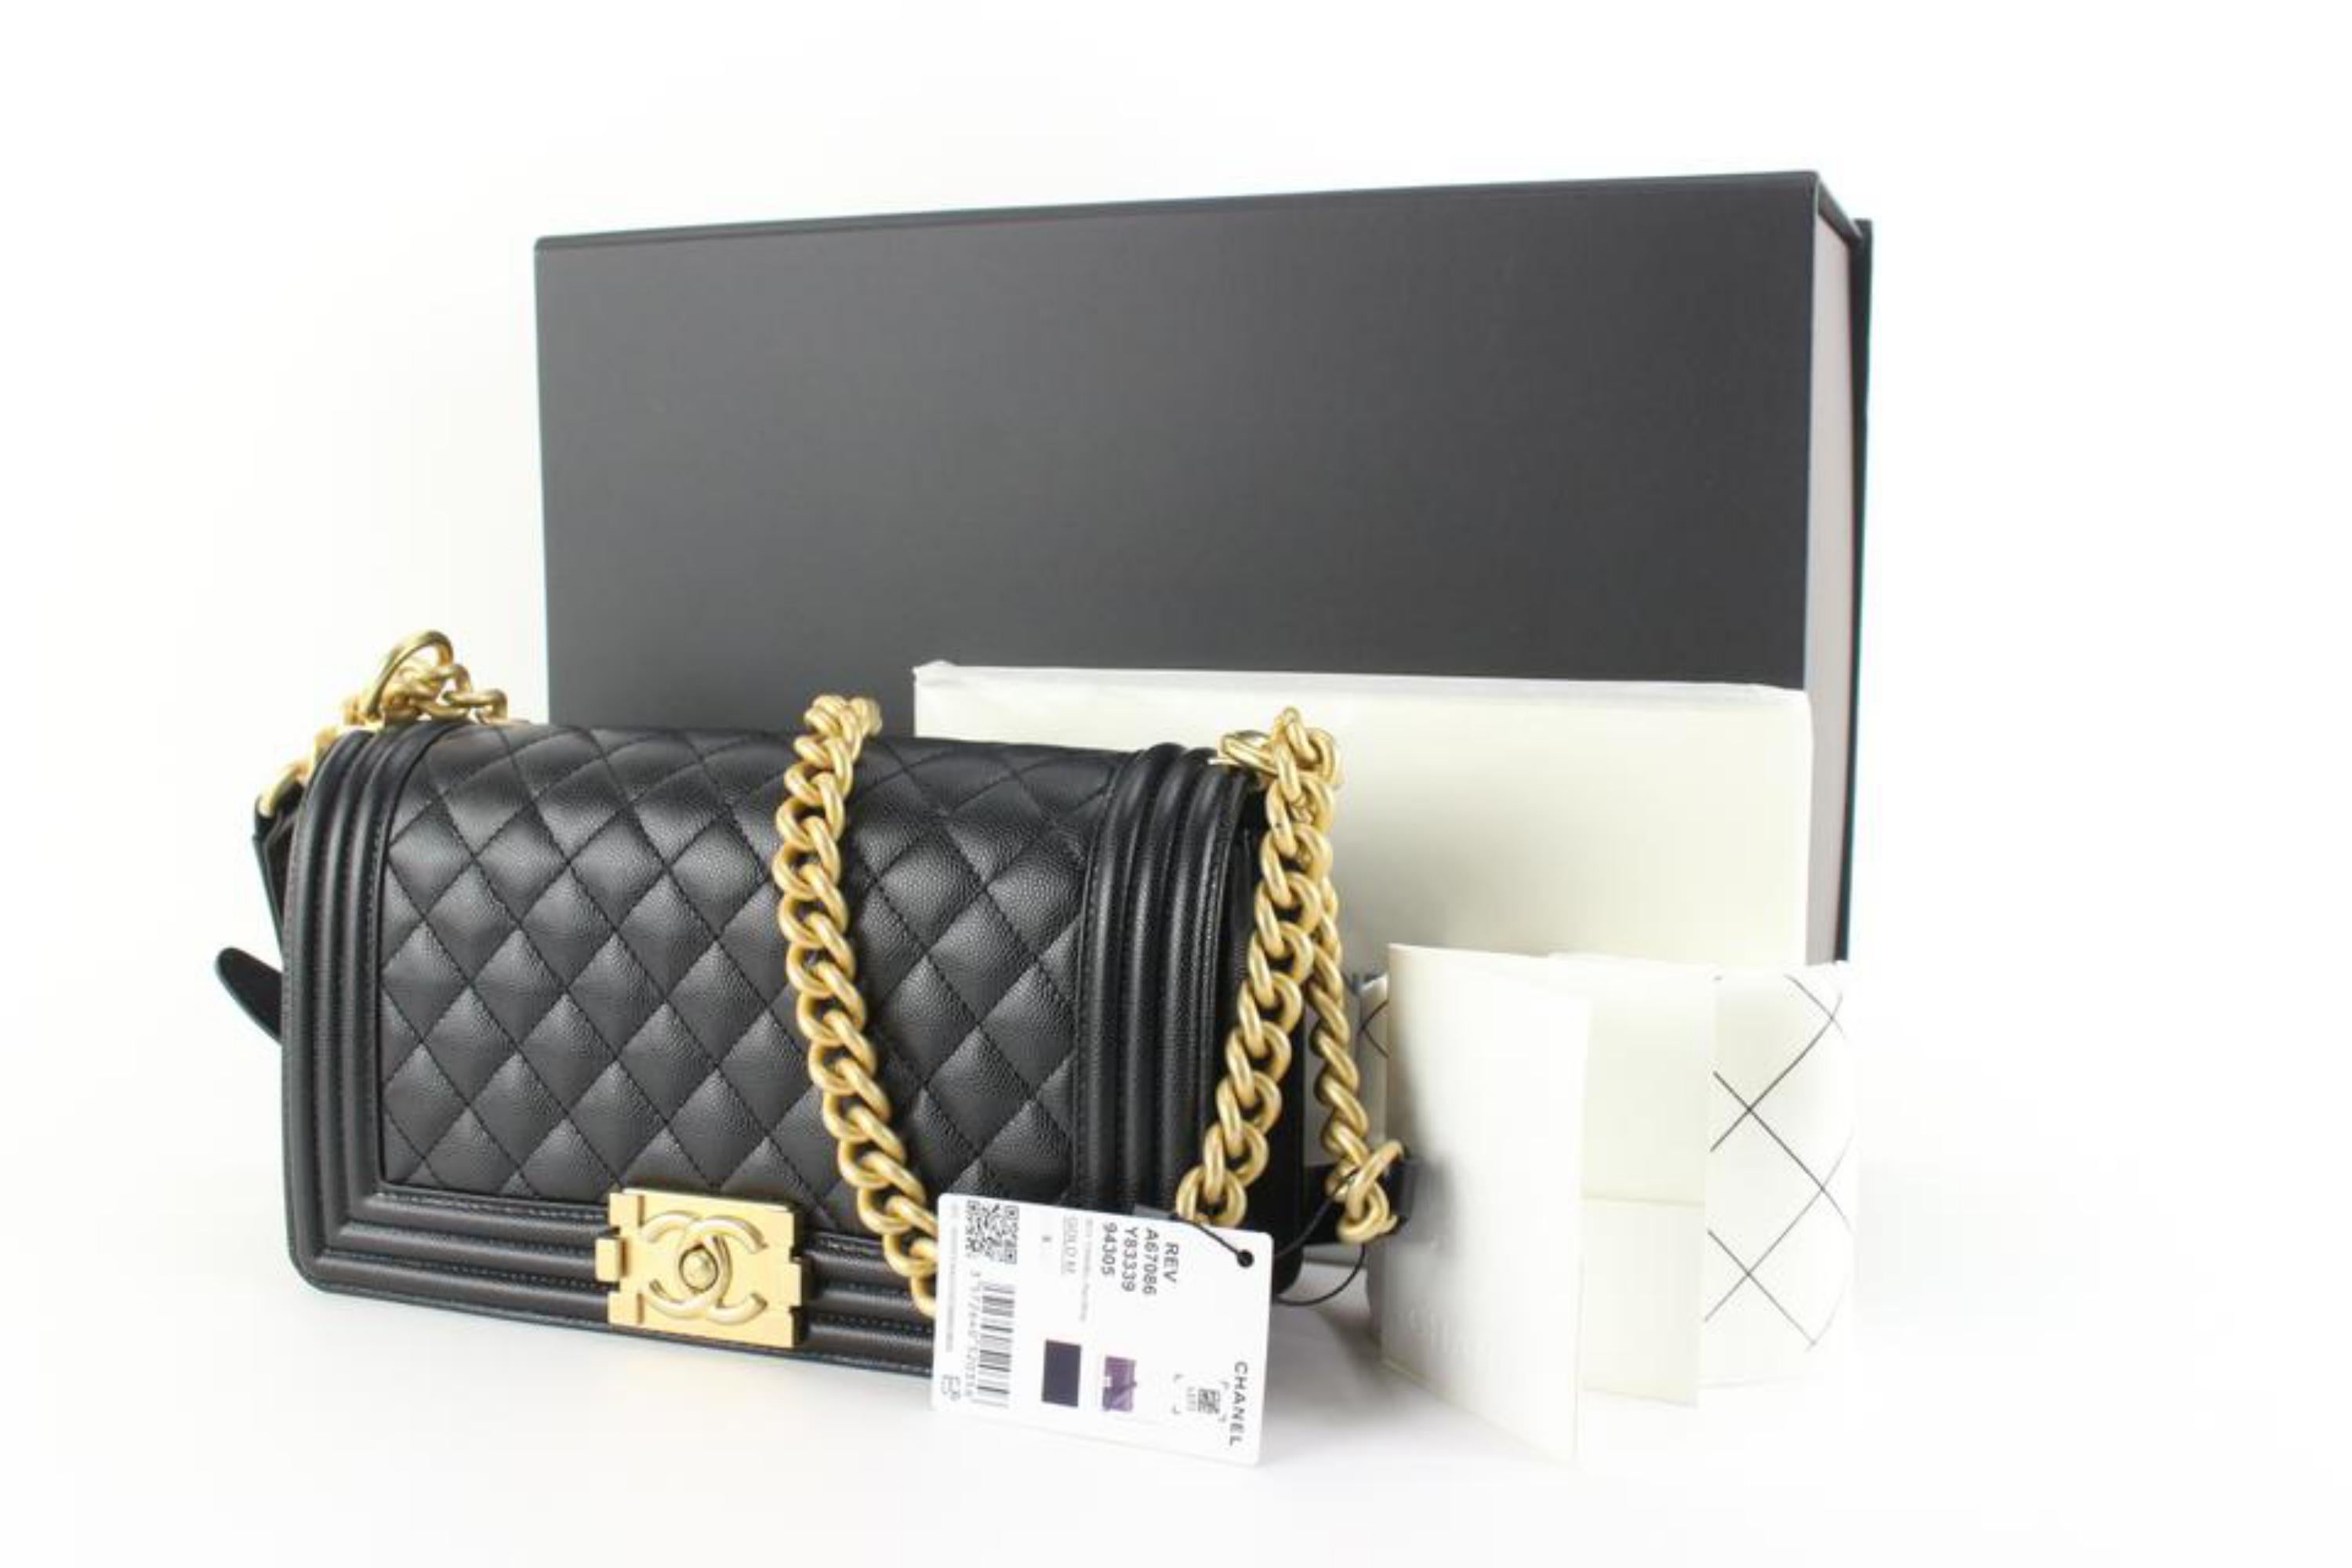 Chanel Black Quilted Caviar Leather Medium Boy Gold Chain Bag 84ck85s 5